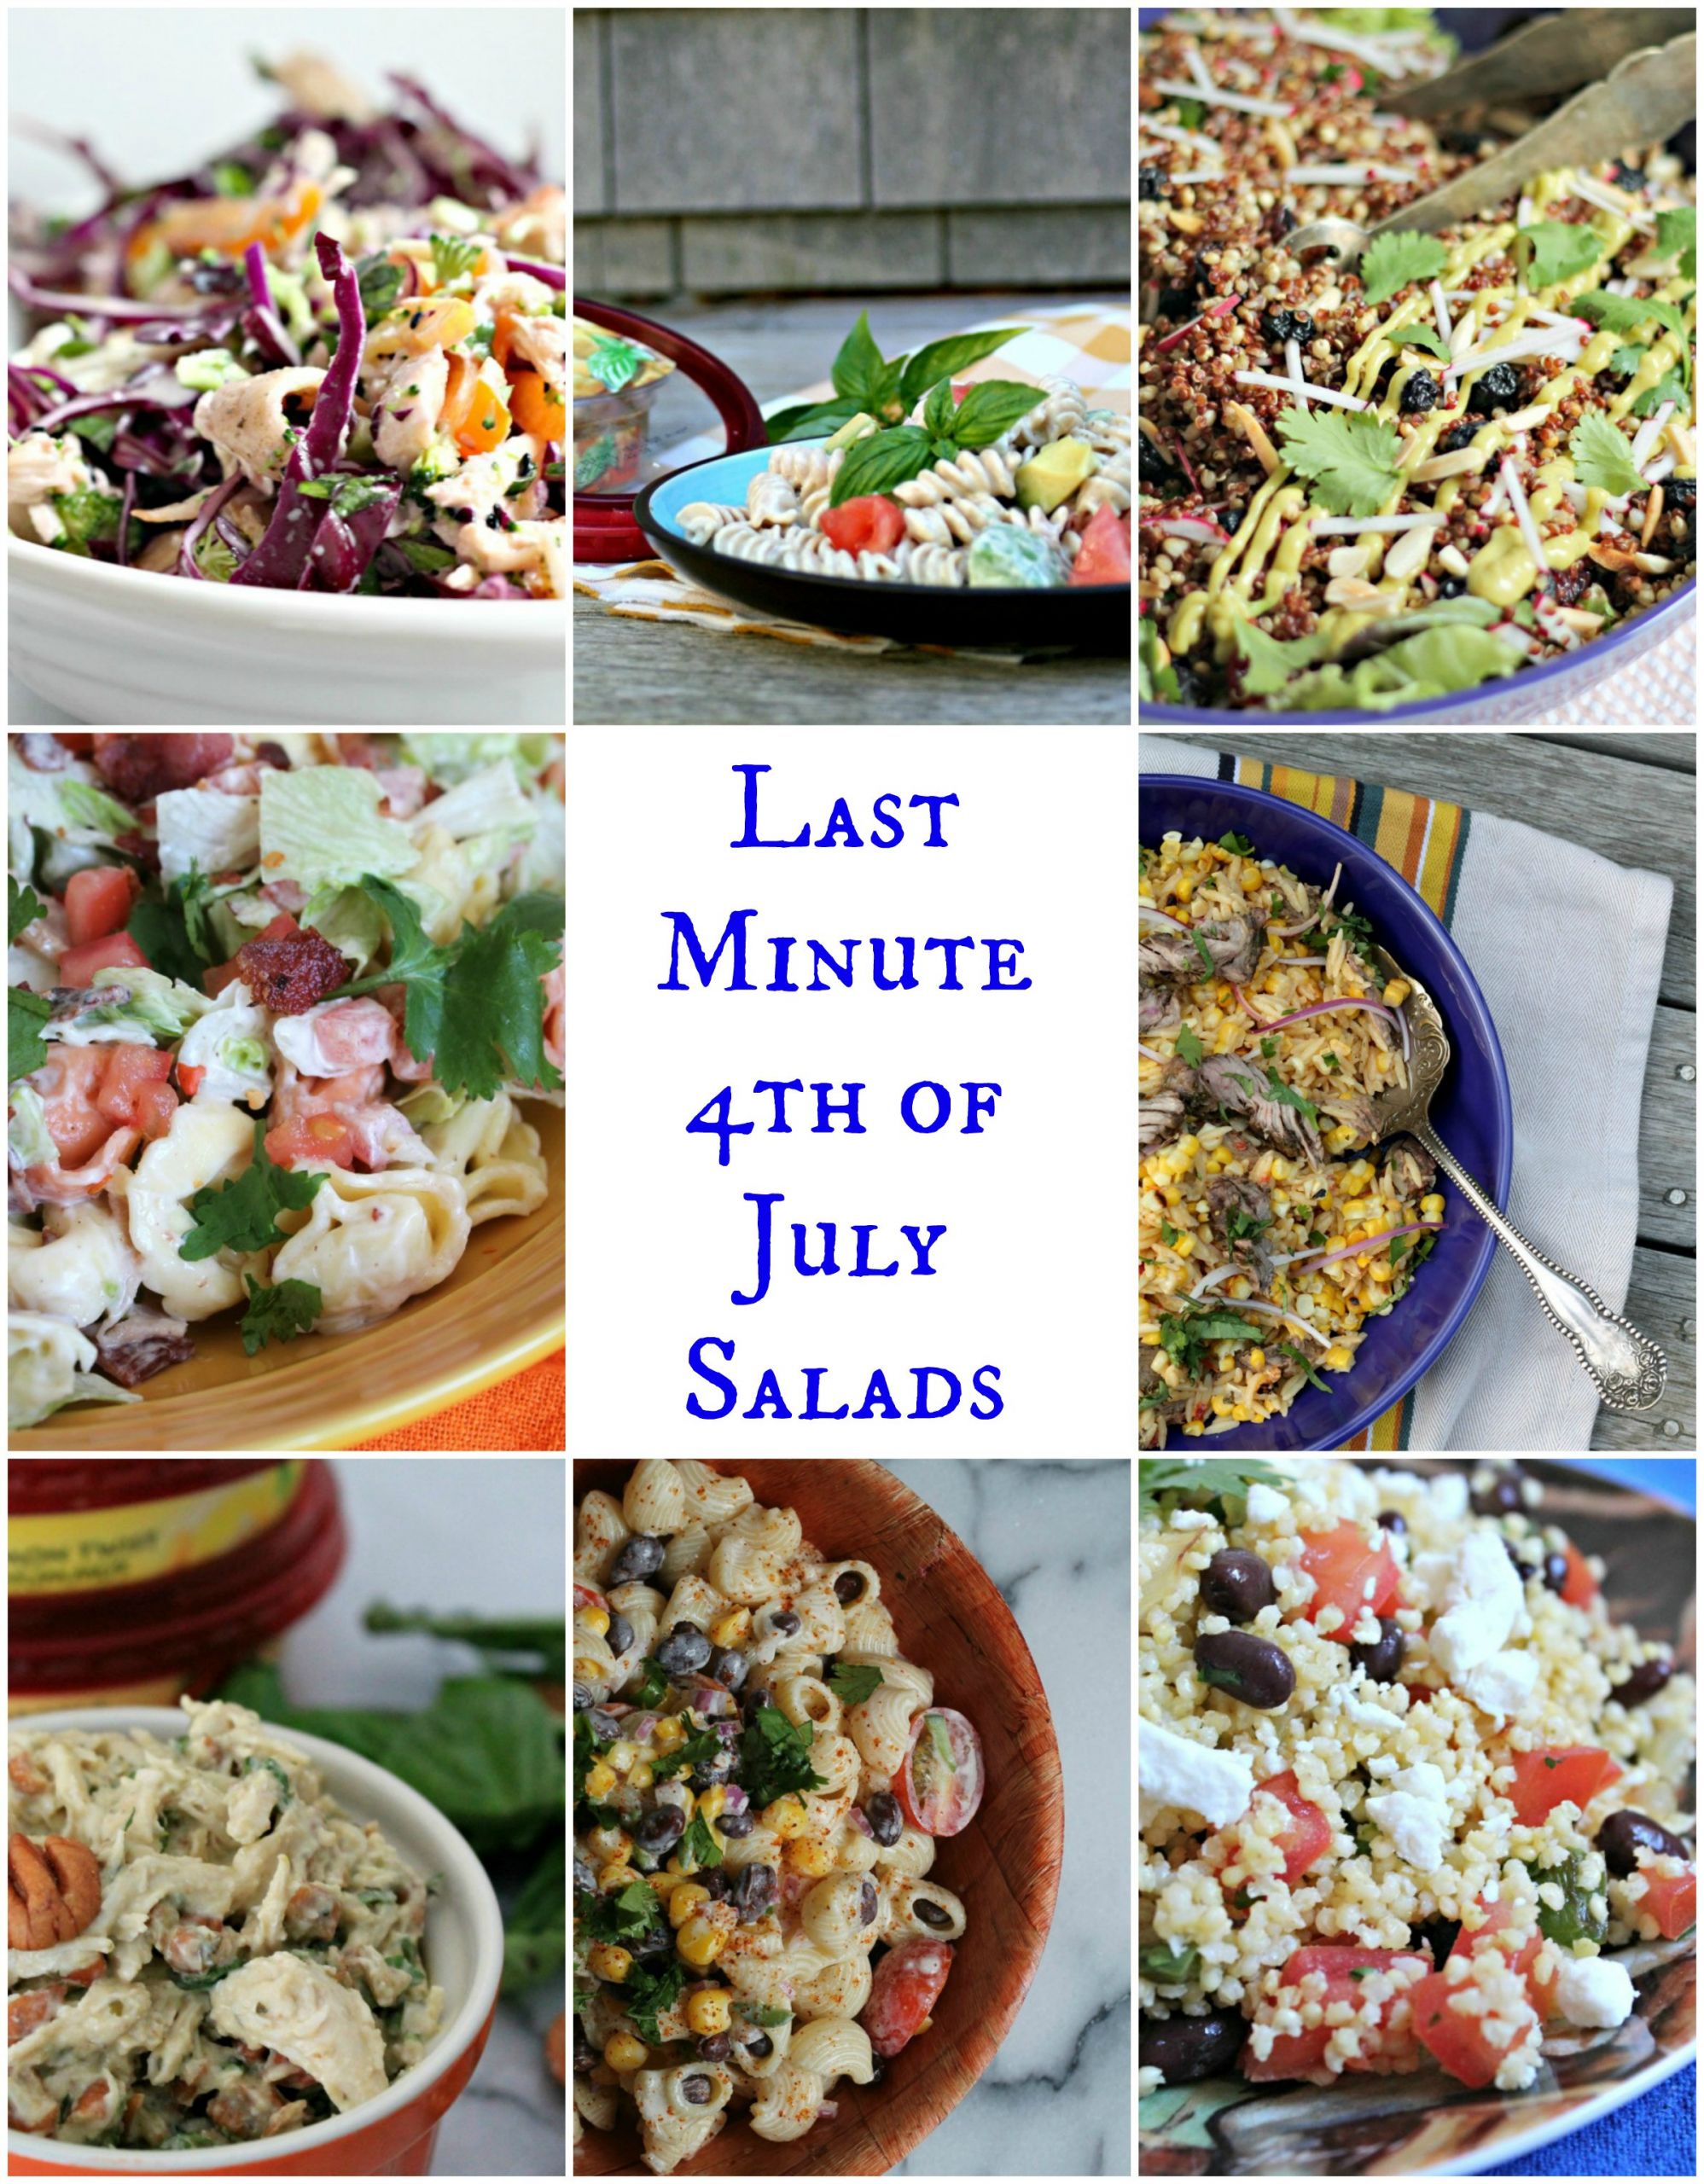 4Th Of July Salads
 10 Last Minute Fourth of July Salad Recipes Cooking with